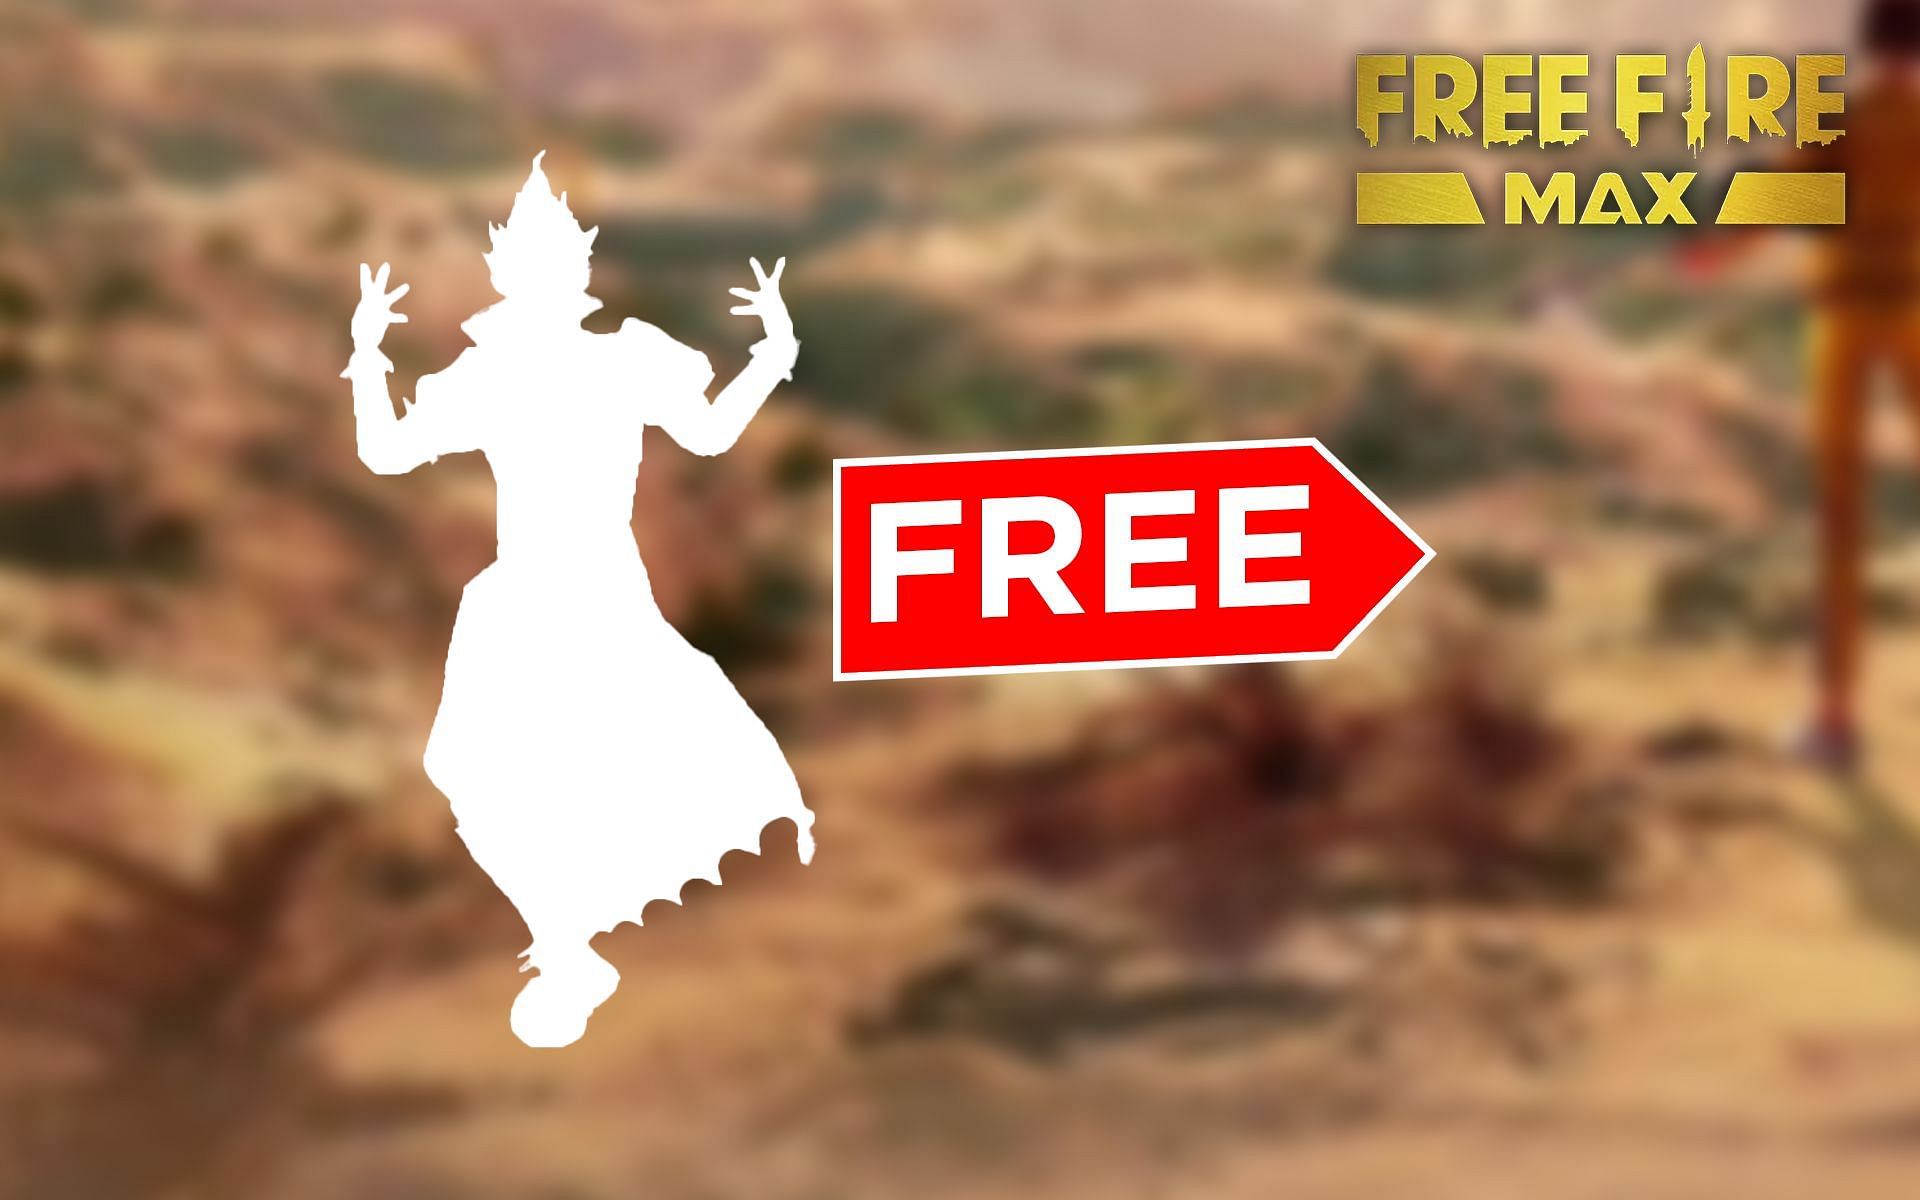 Emotes are in high-demand among Free Fire&#039;s community across the globe (Image via Sportskeeda)